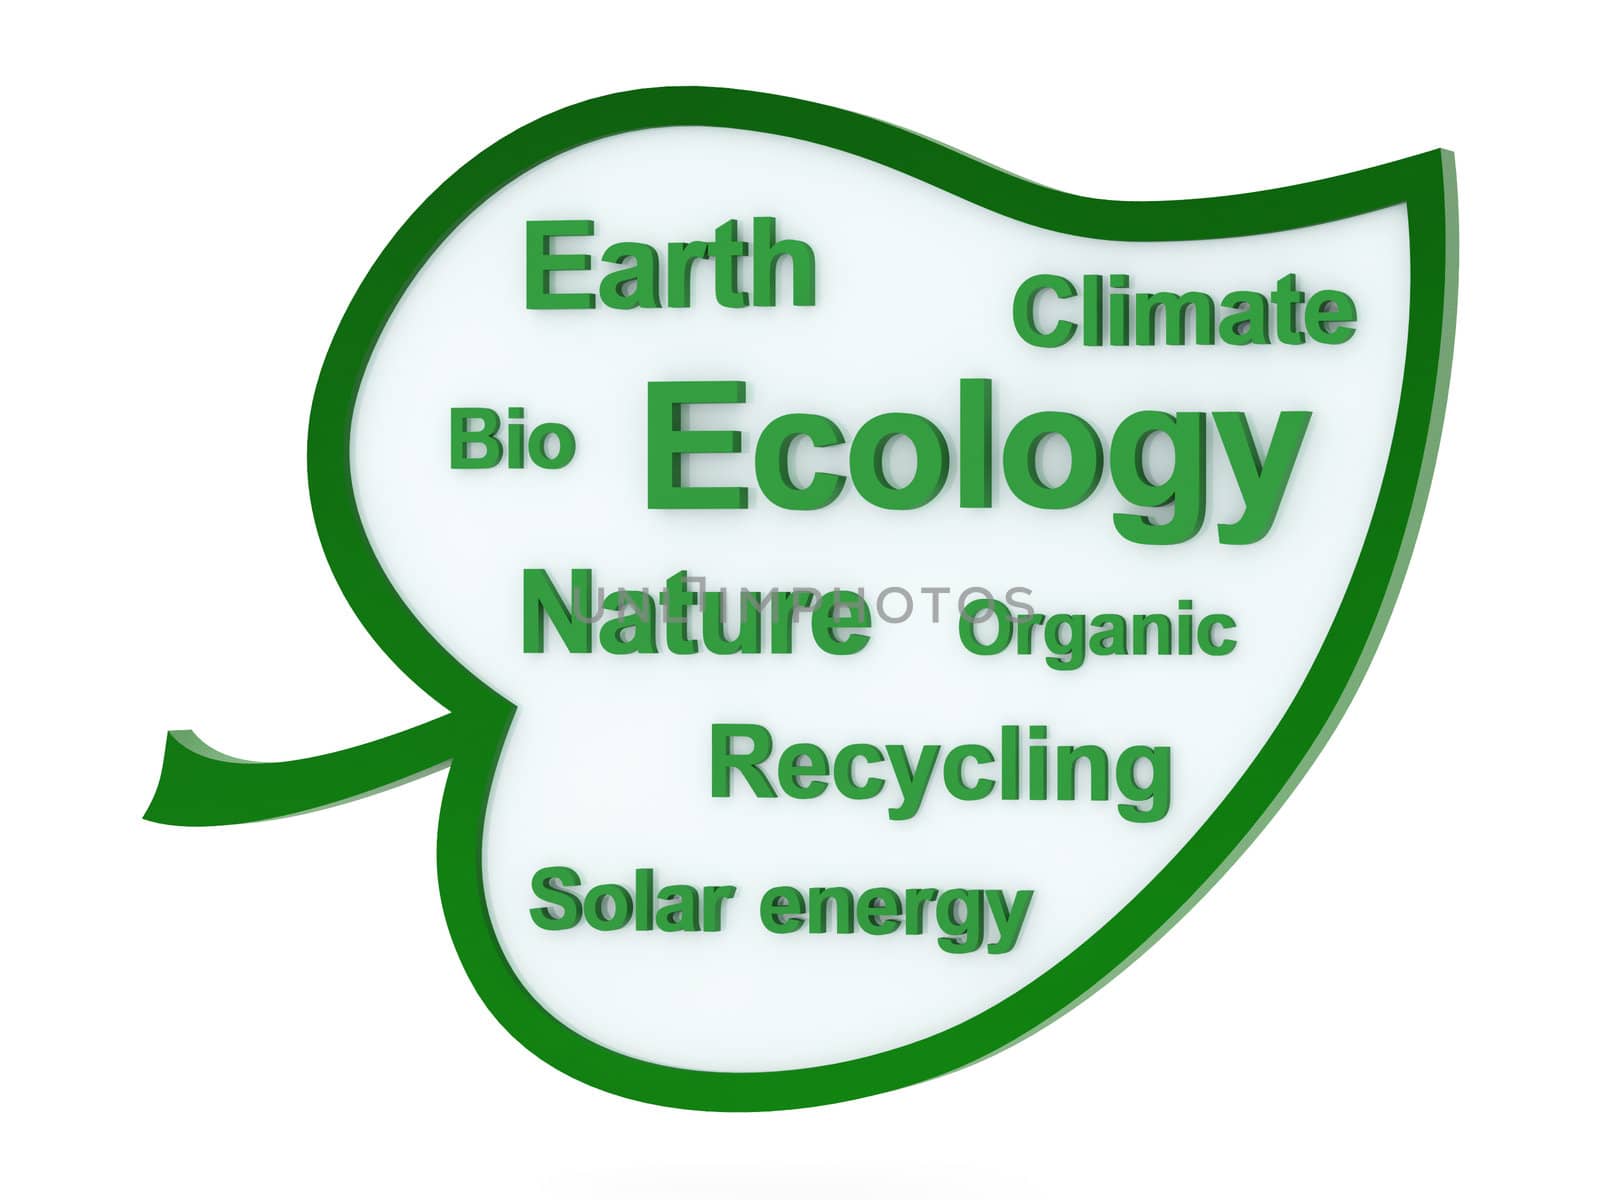 Speech bubble or tag cloud with ecological words on white